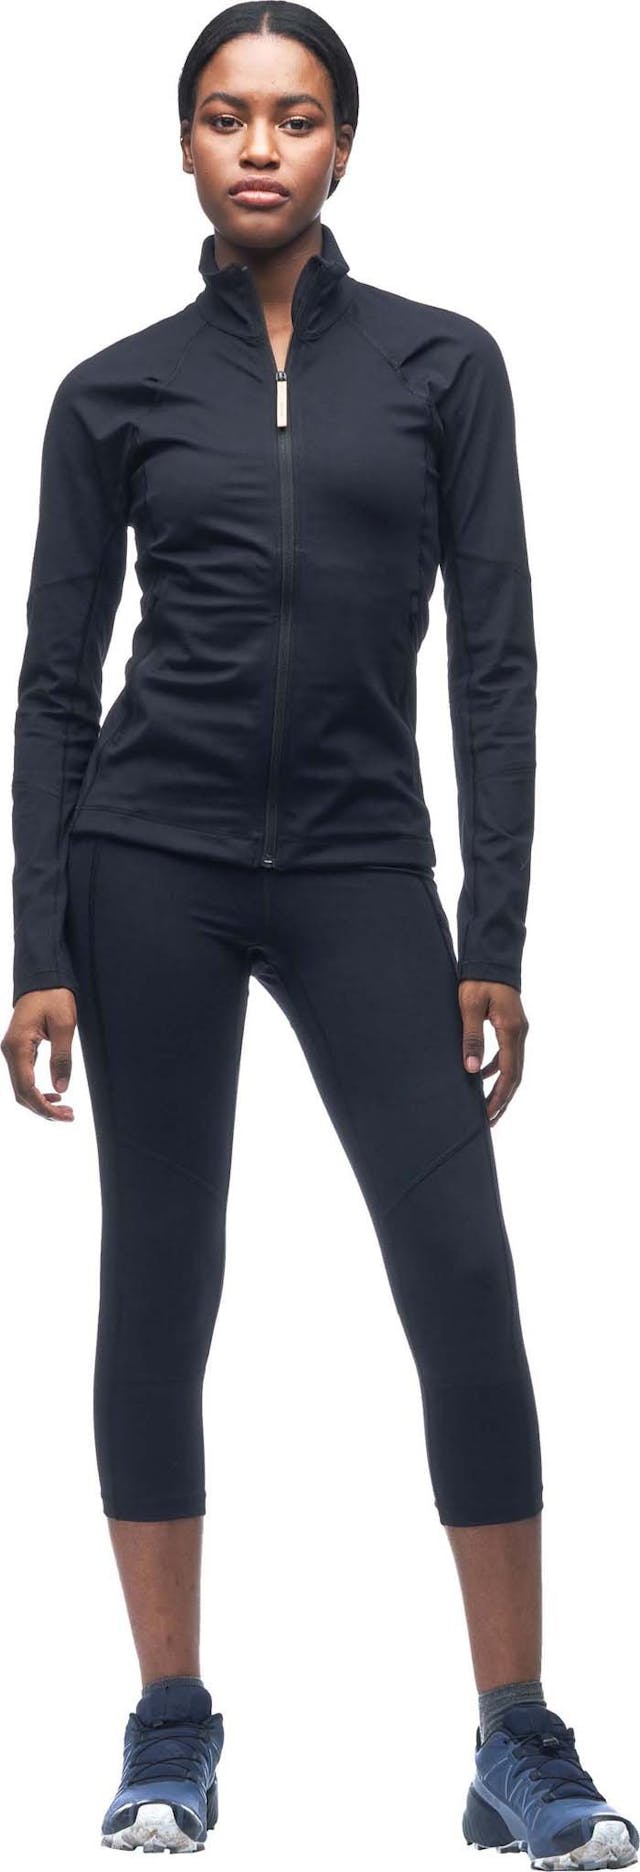 Product image for Tejer Long Sleeve Zip Up Jacket - Women's